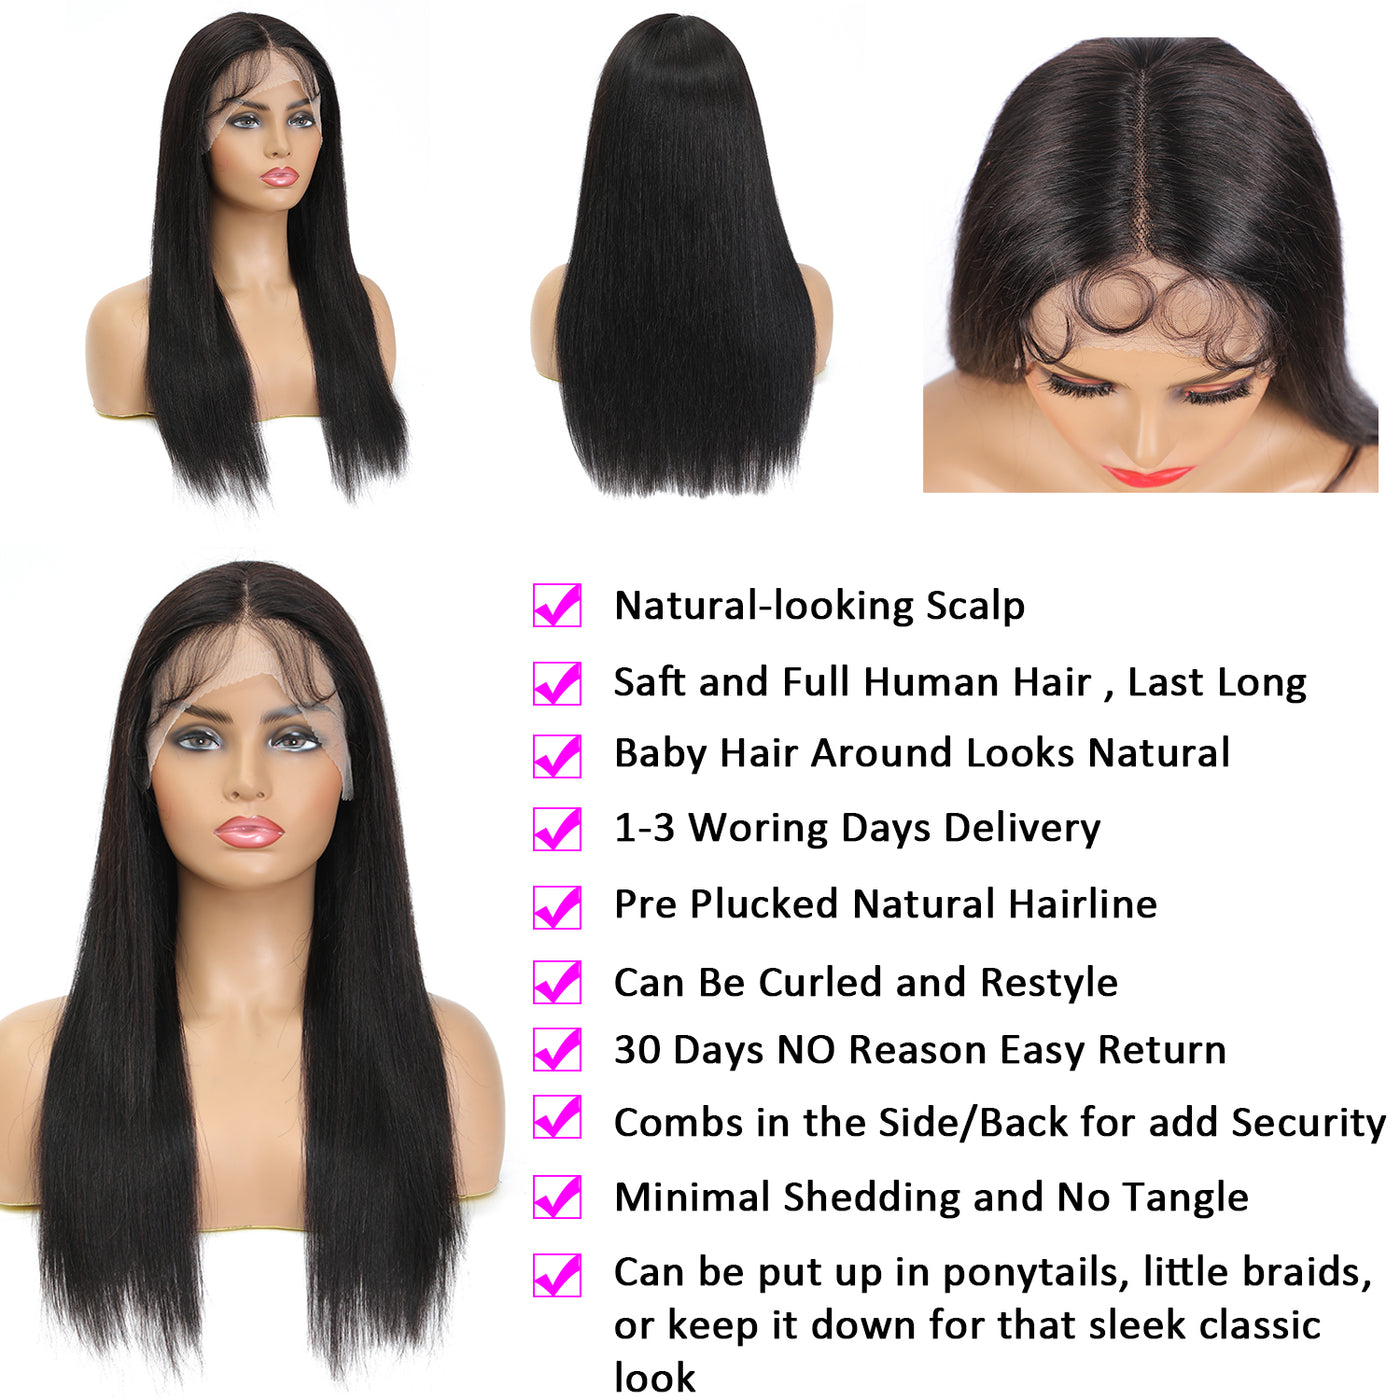 13X4X1 Part Lace Front Wigs Natural Color Human Hair Wig